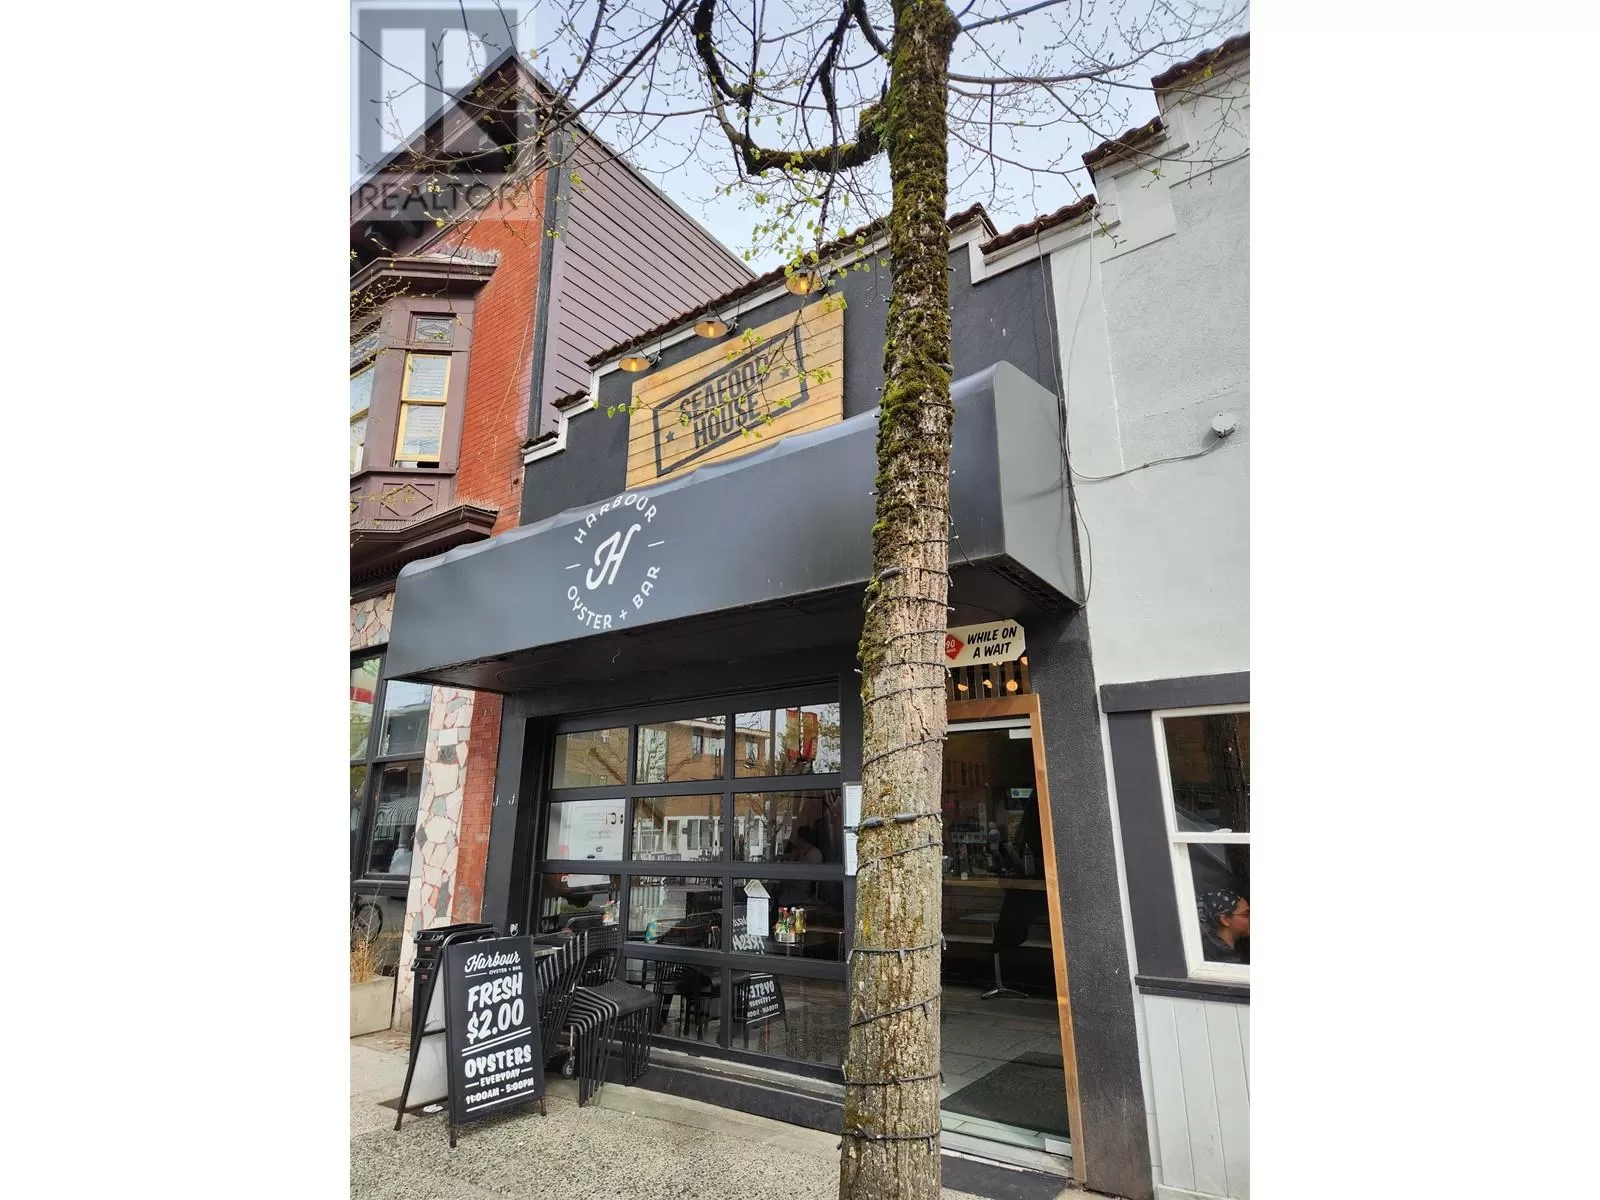 1408 Commercial Drive, Vancouver, British Columbia V5L 3Y3